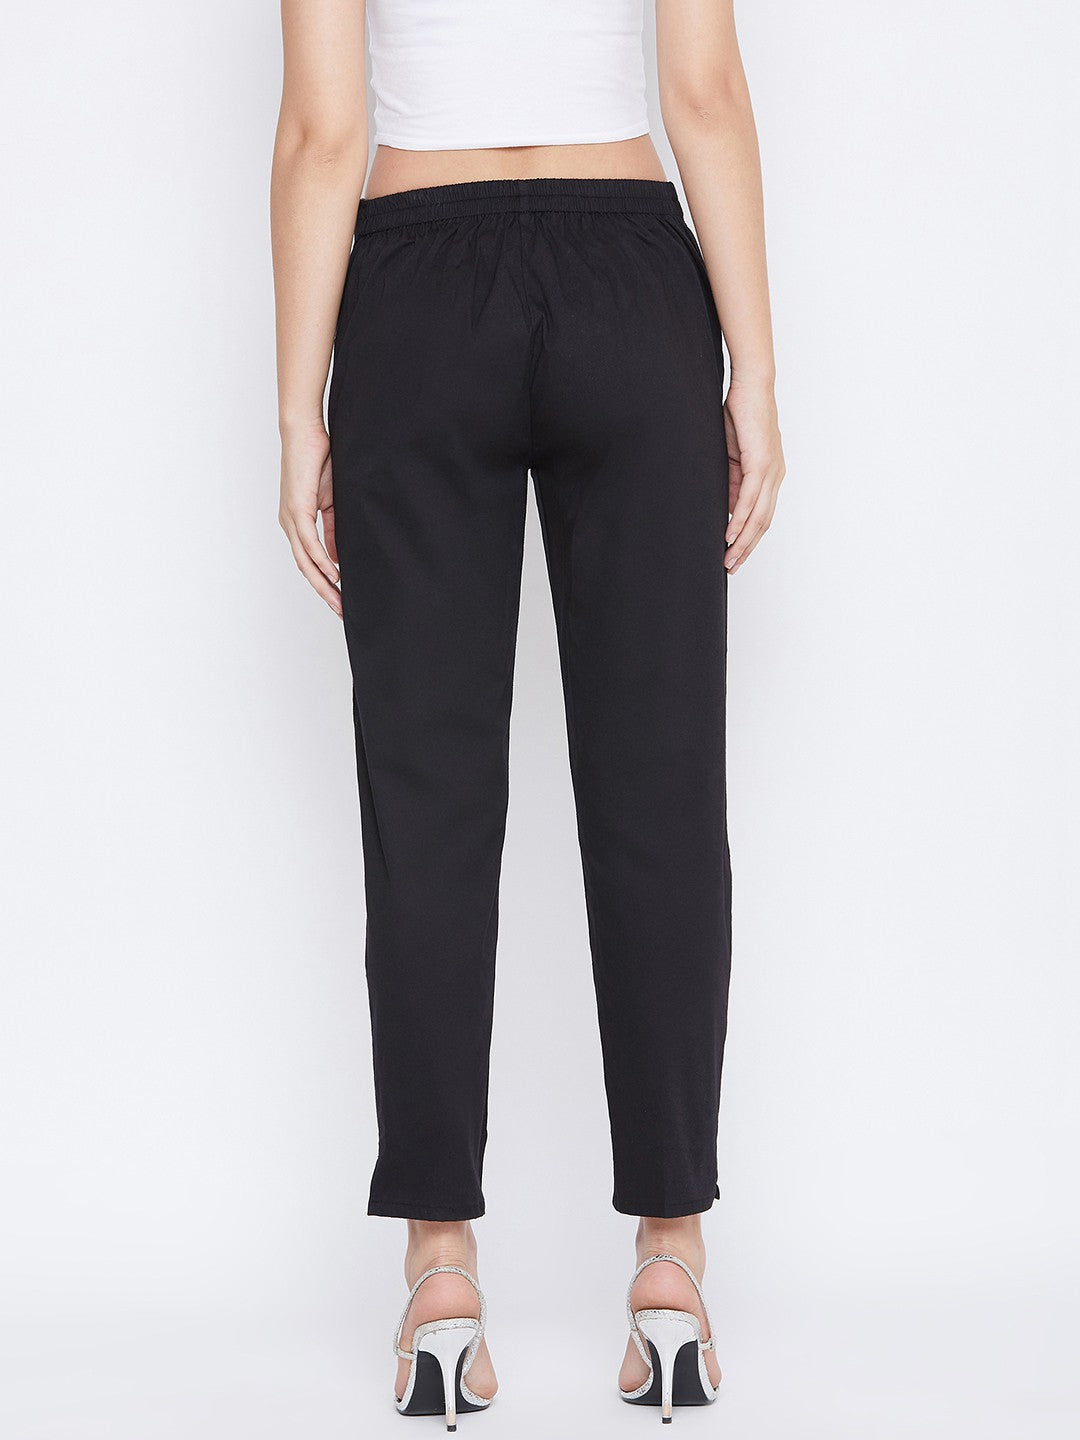 LADIES LOWER  TRACK PANTS FOR WOMEN Trousers  Pants